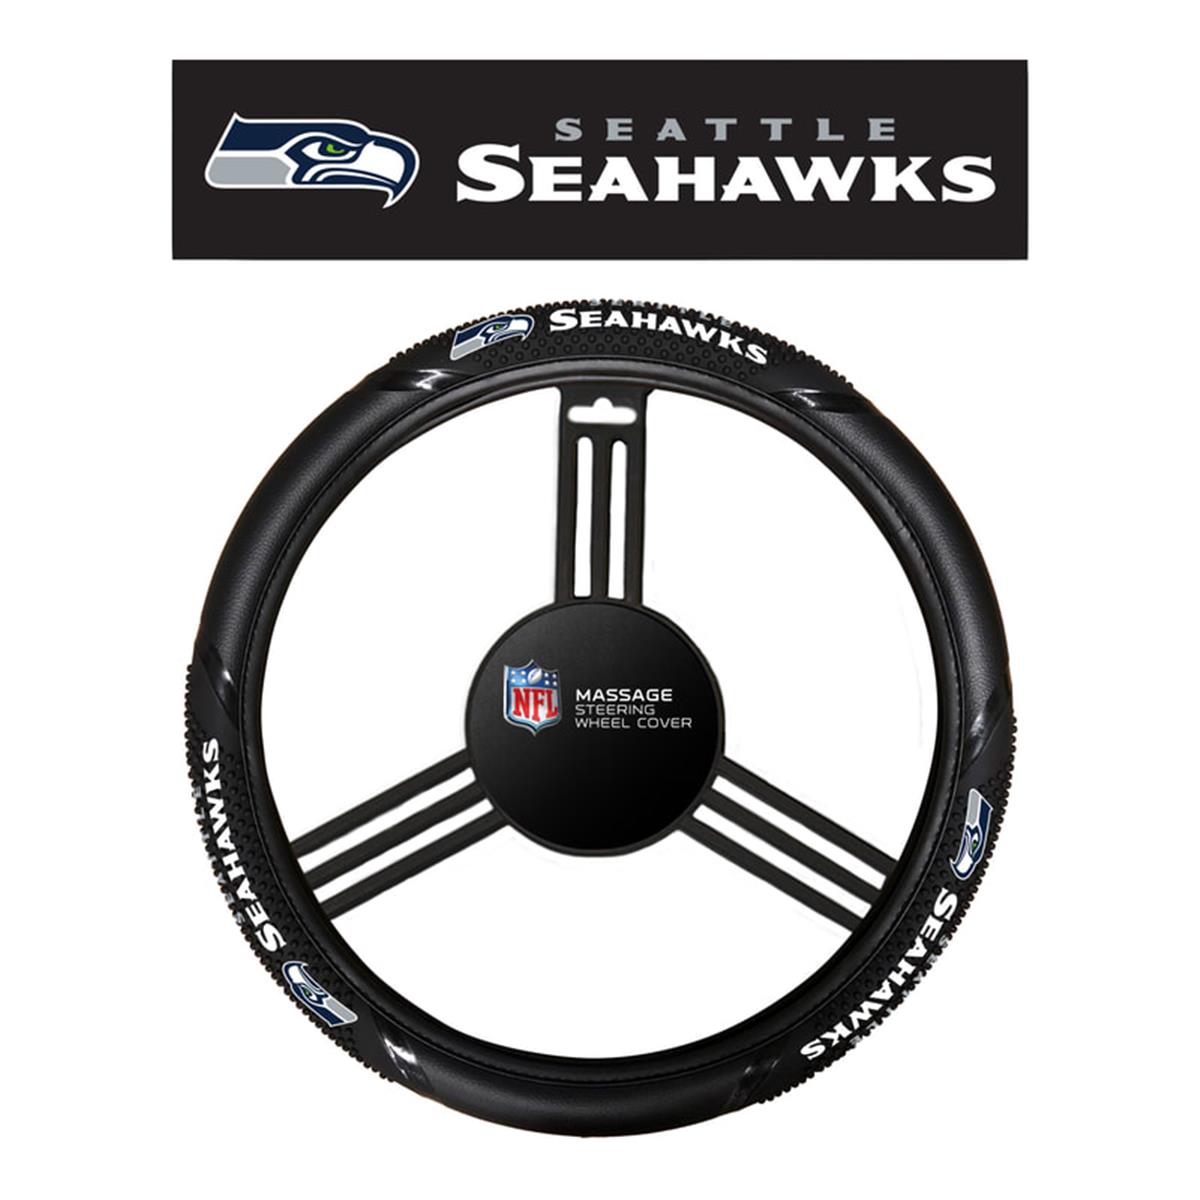 Picture of Fremont Die 2324596614 MLB Seattle Seahawks Steering Wheel Cover - Massage Grip Style